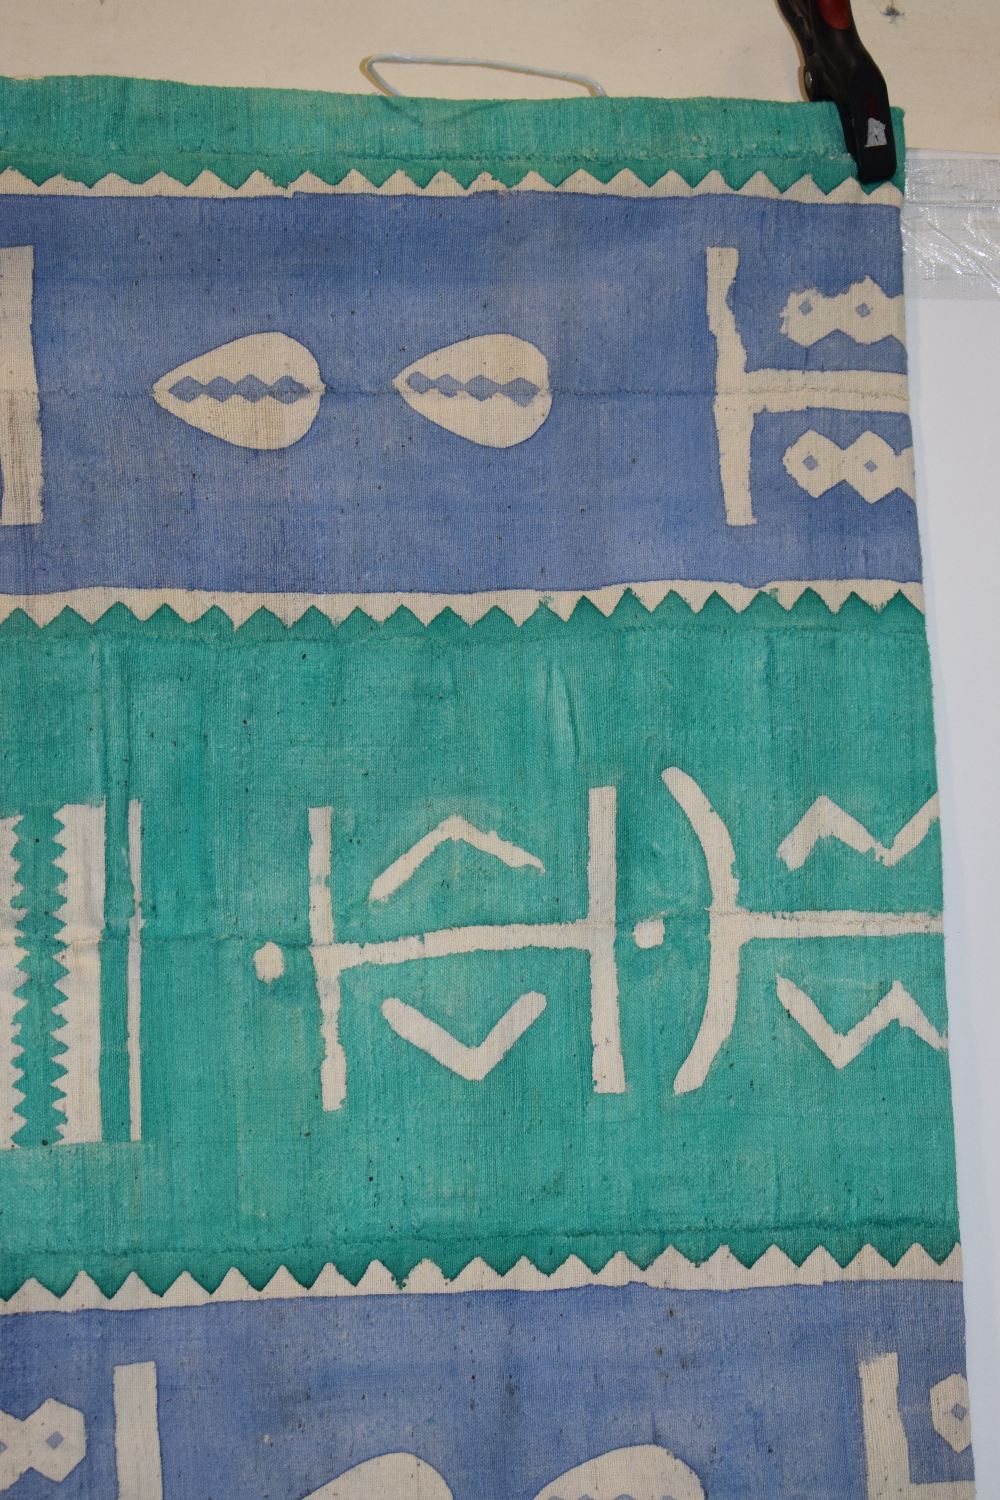 Five African 'Mud' or Bogolan cloths, Mali, west Africa, 20th century, the cotton strips dyed in - Image 14 of 31